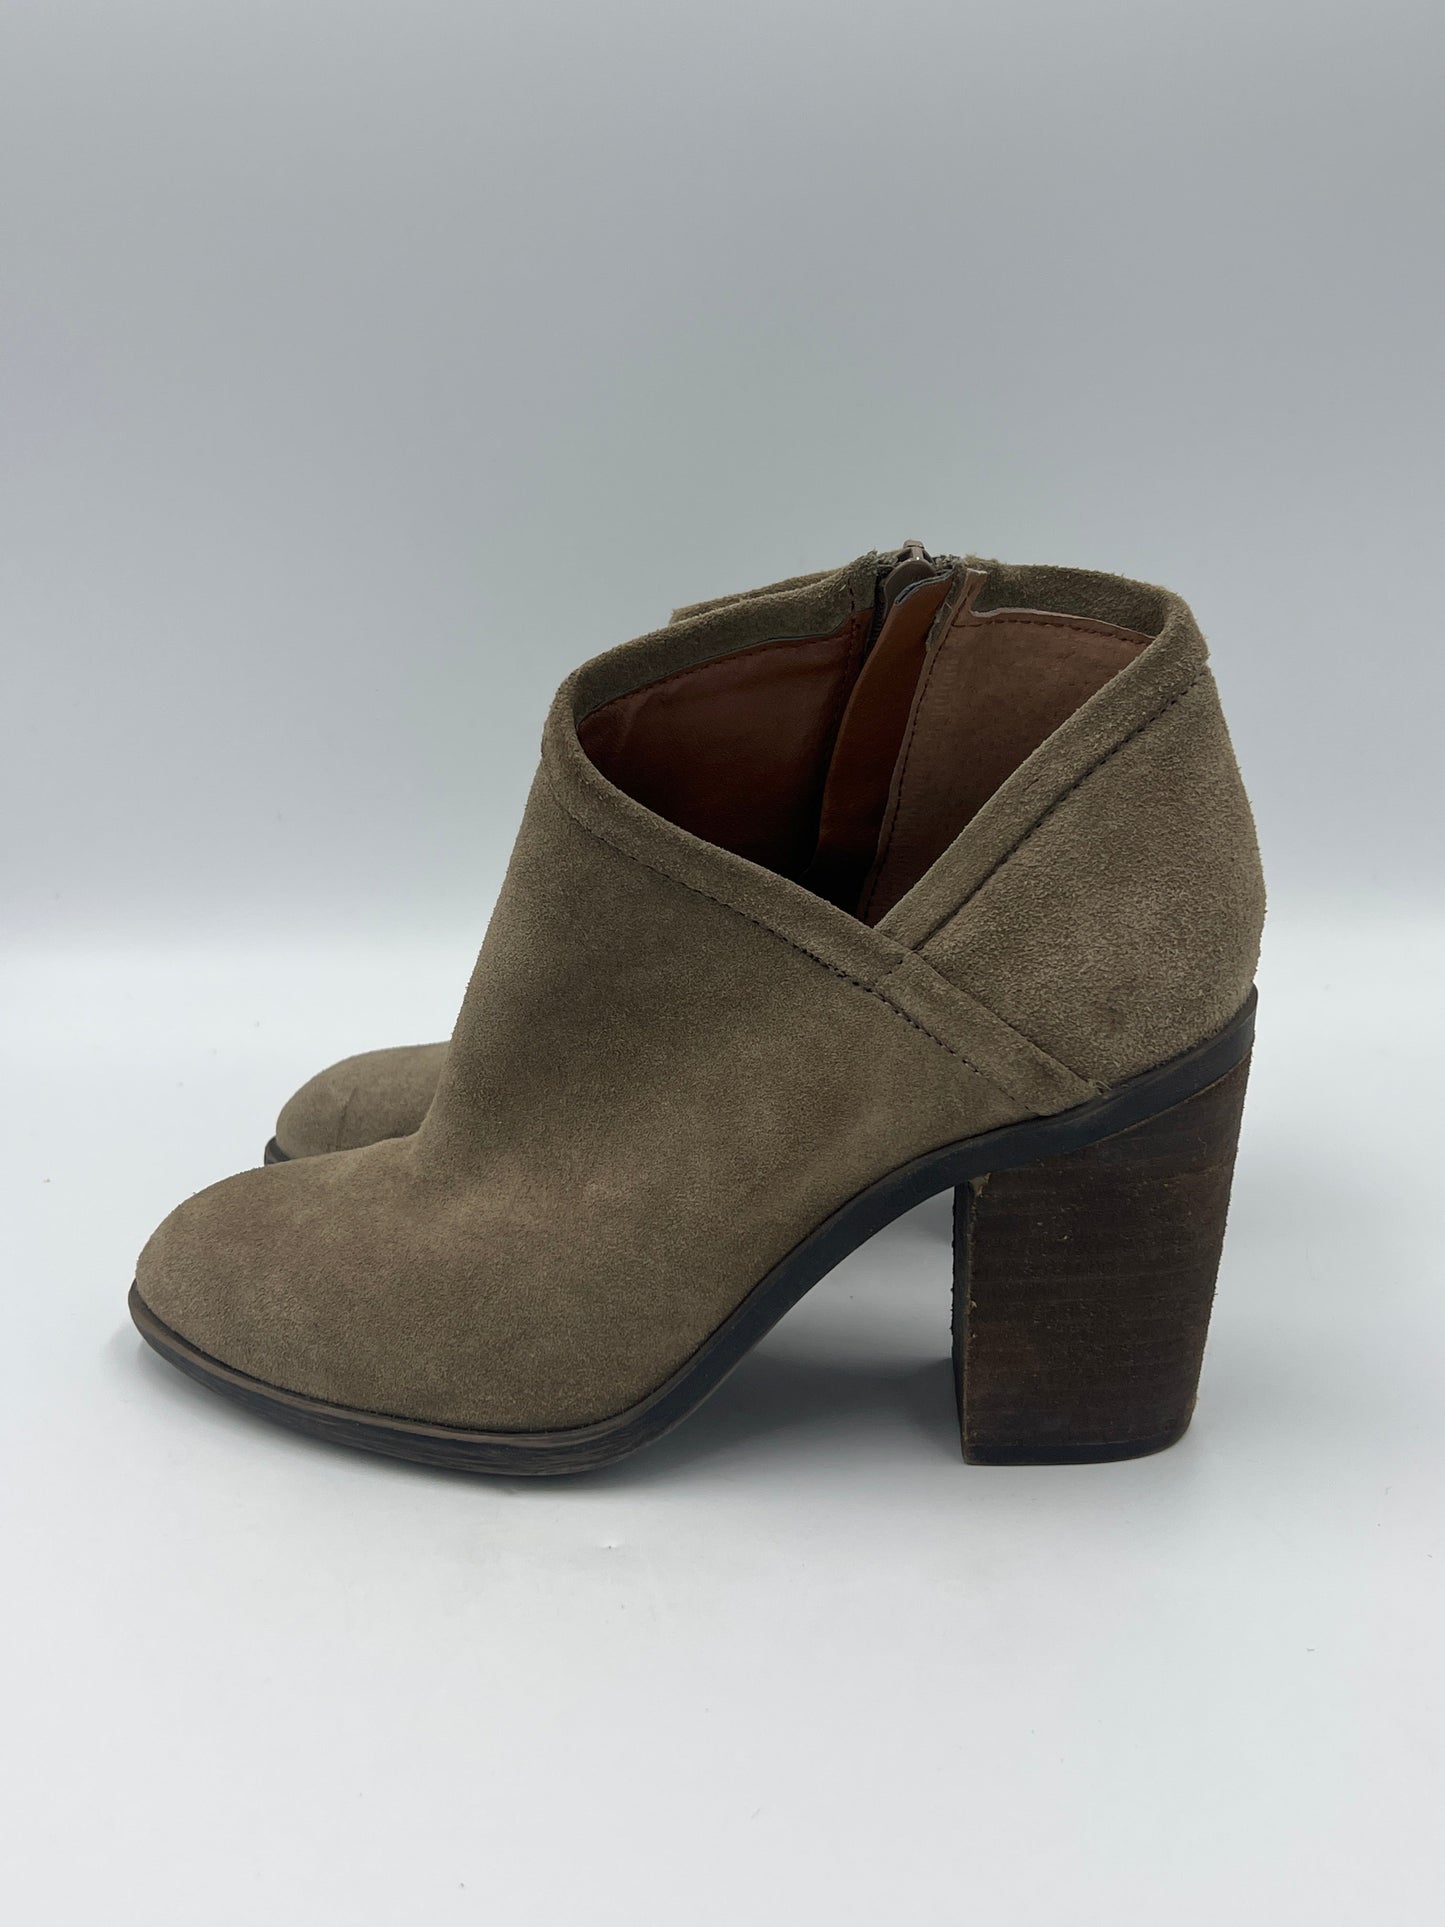 Boots Ankle Heels By Lucky Brand  Size: 7.5